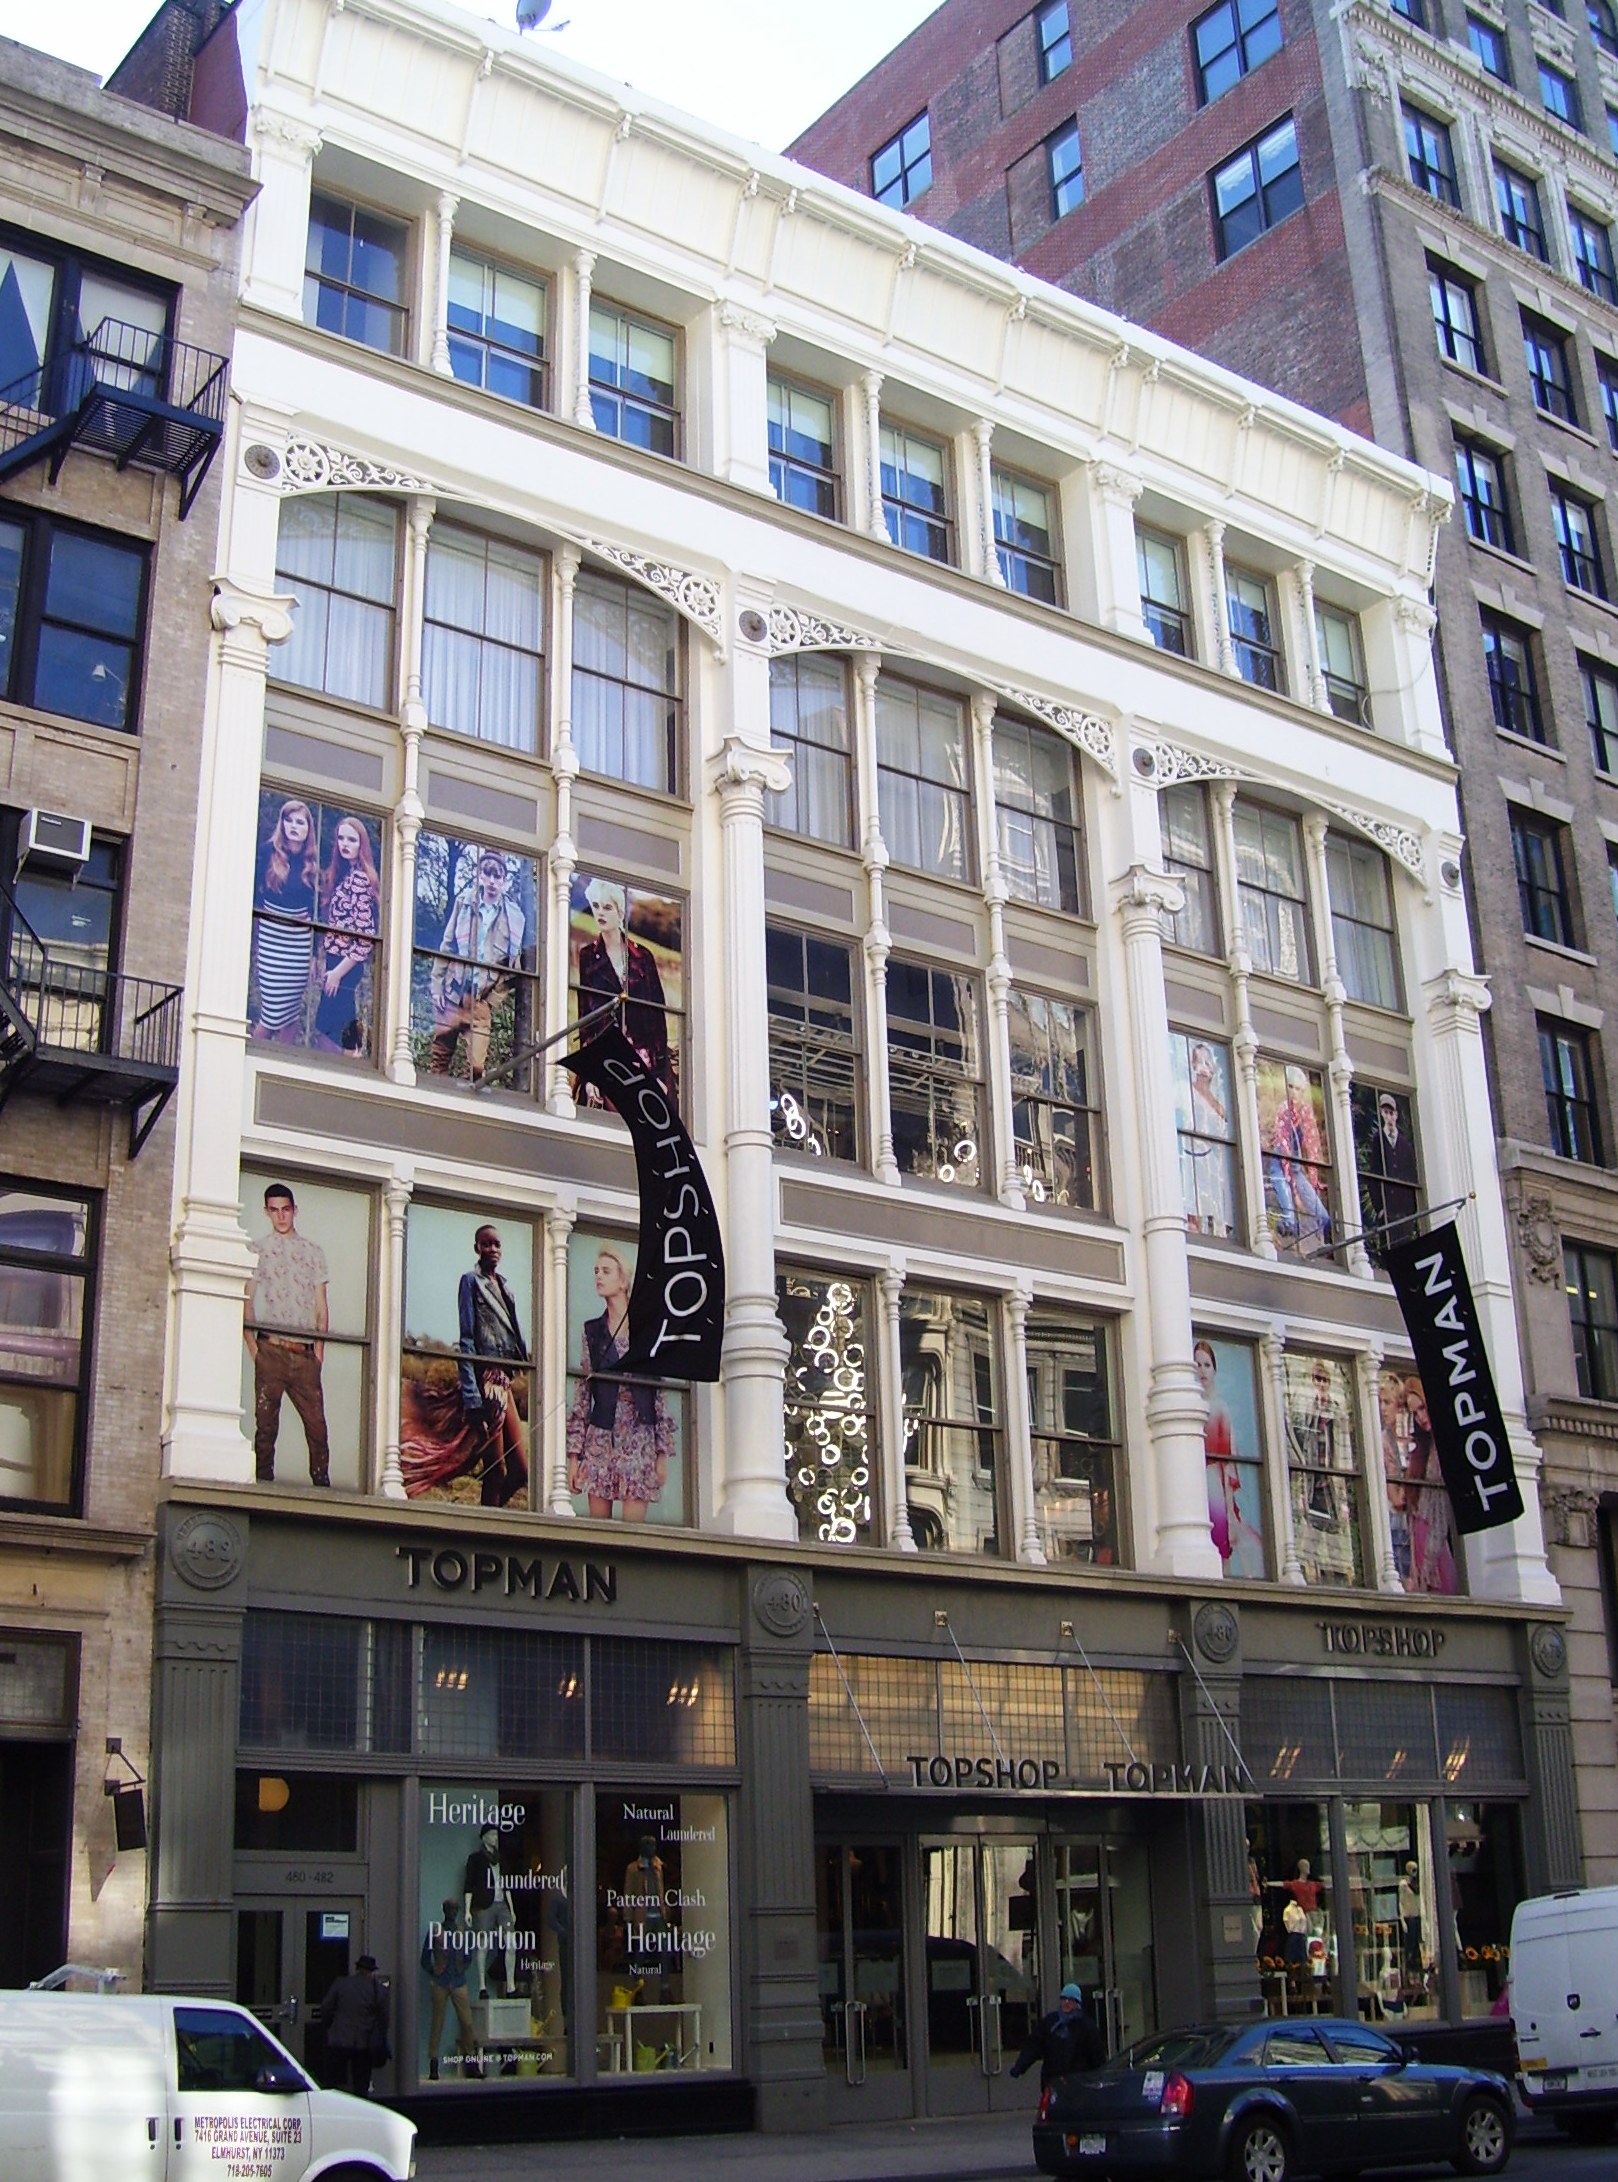 Roosevelt Building between Grand and Broome Streets in the SoHo neighborhood of Manhattan